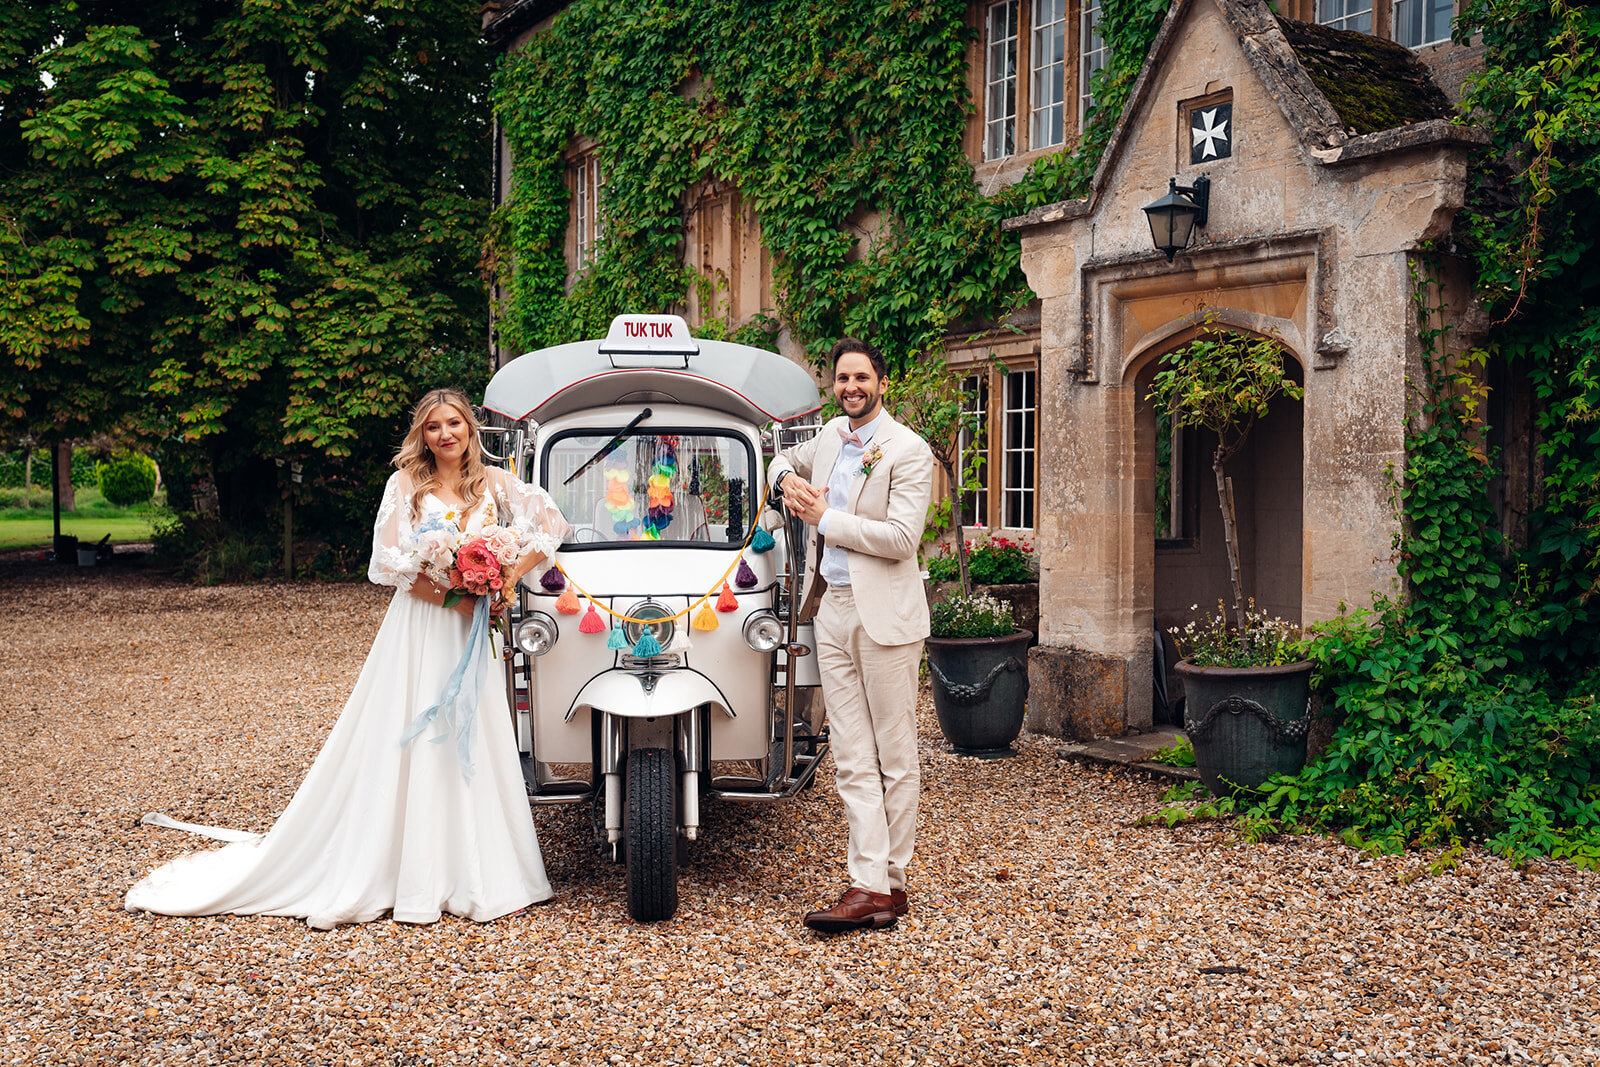 Tuk tuk ride at sunset, as couple exit their cotswold wedding celebrations